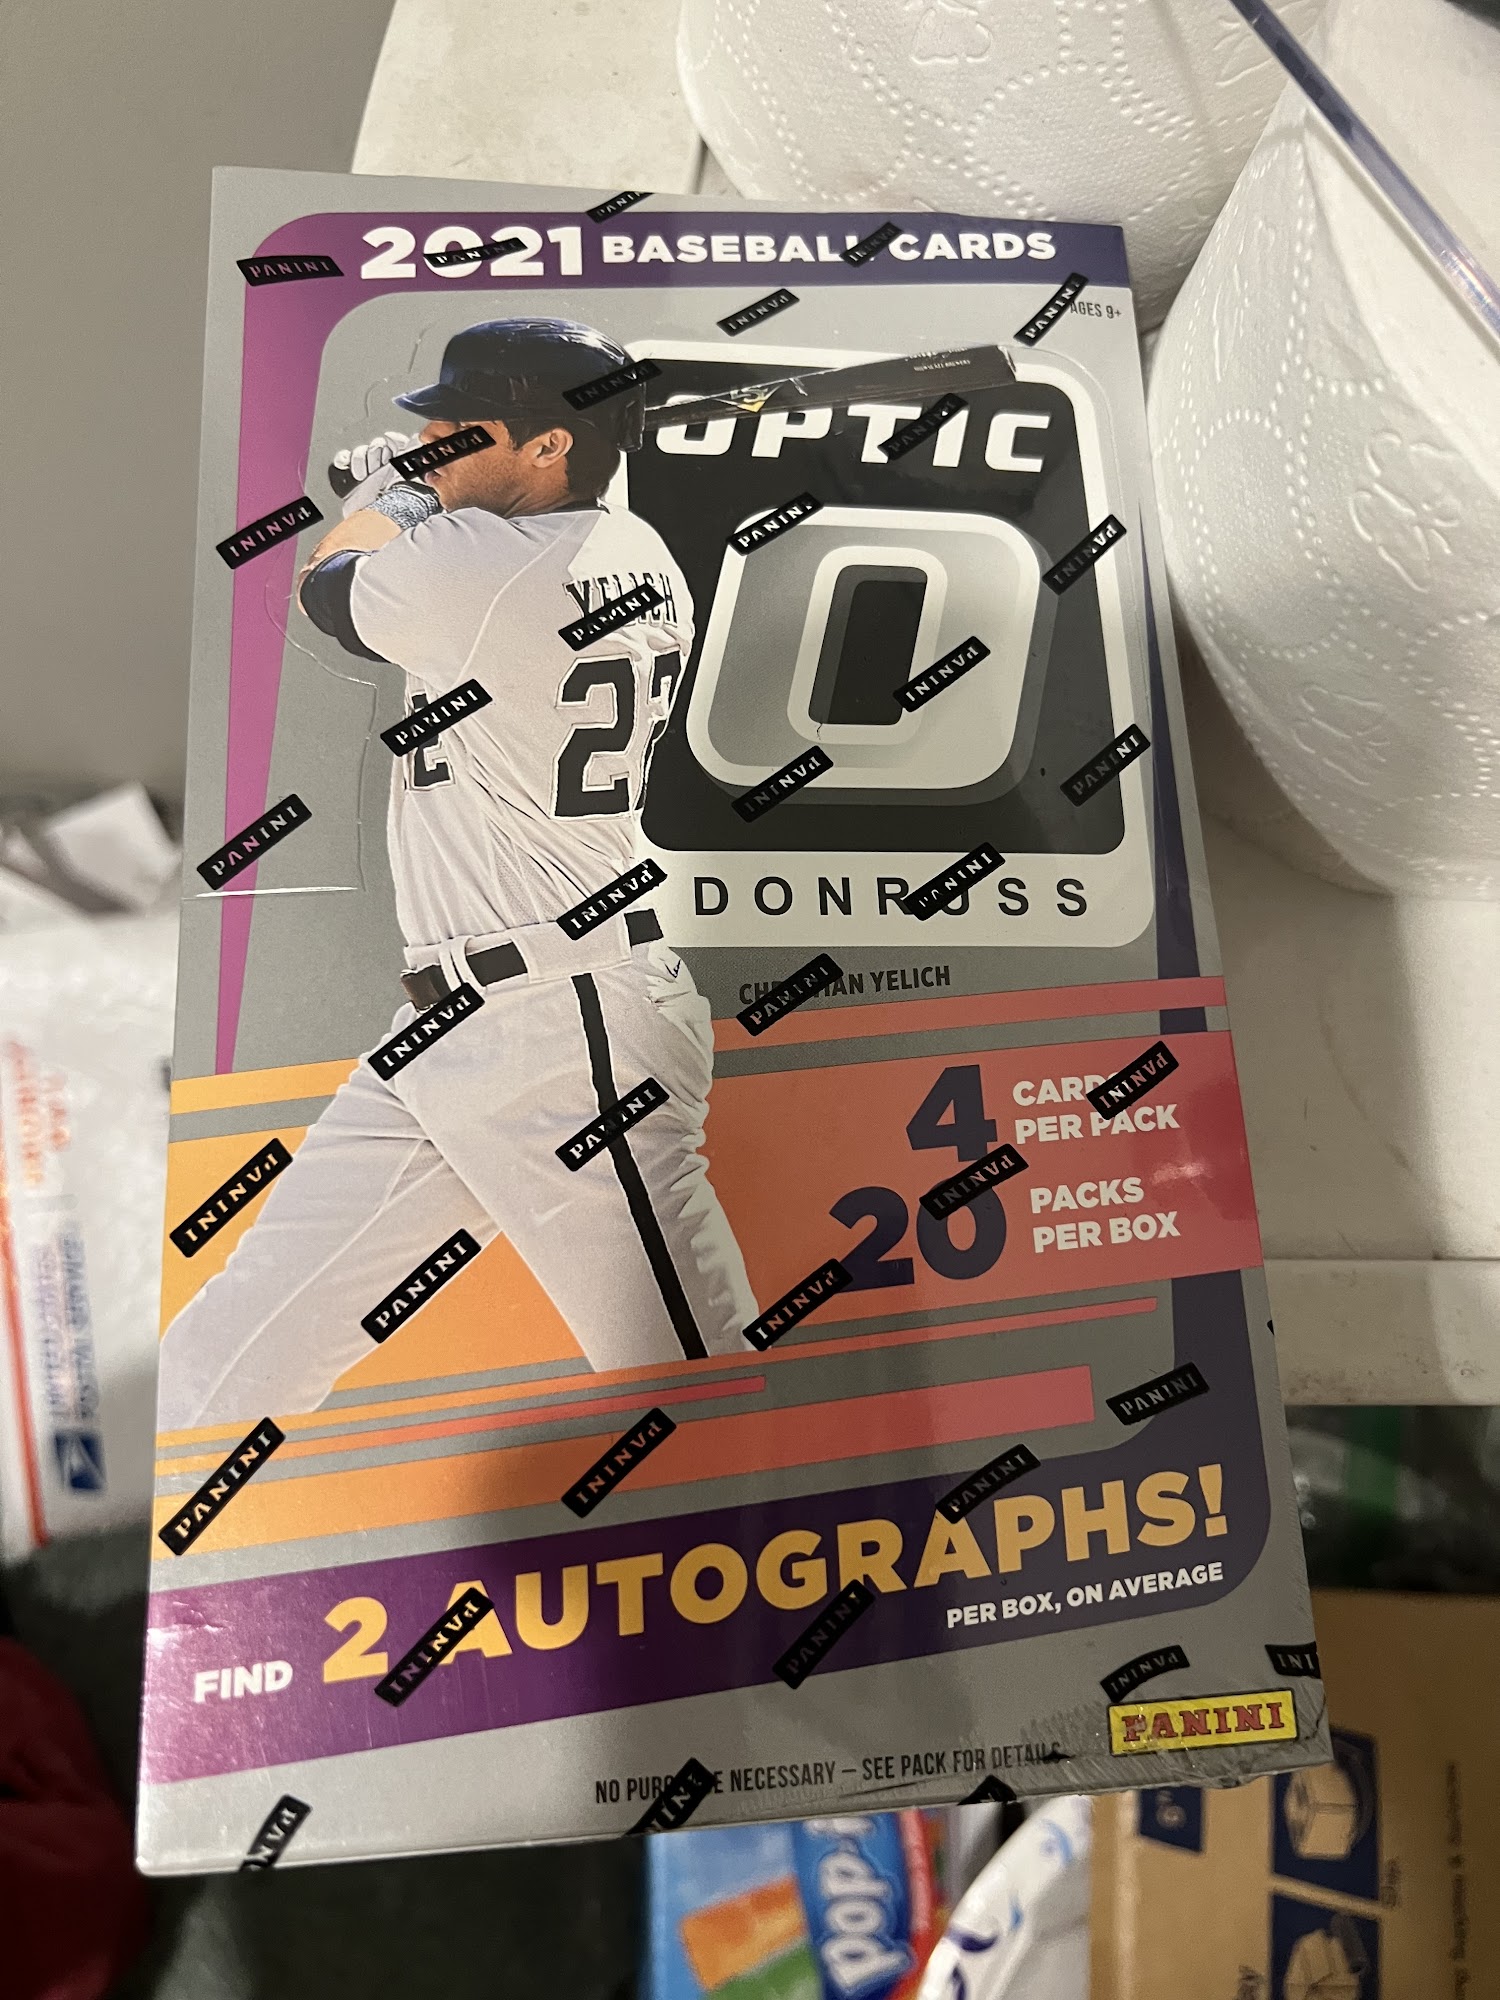 All Star Sports Cards